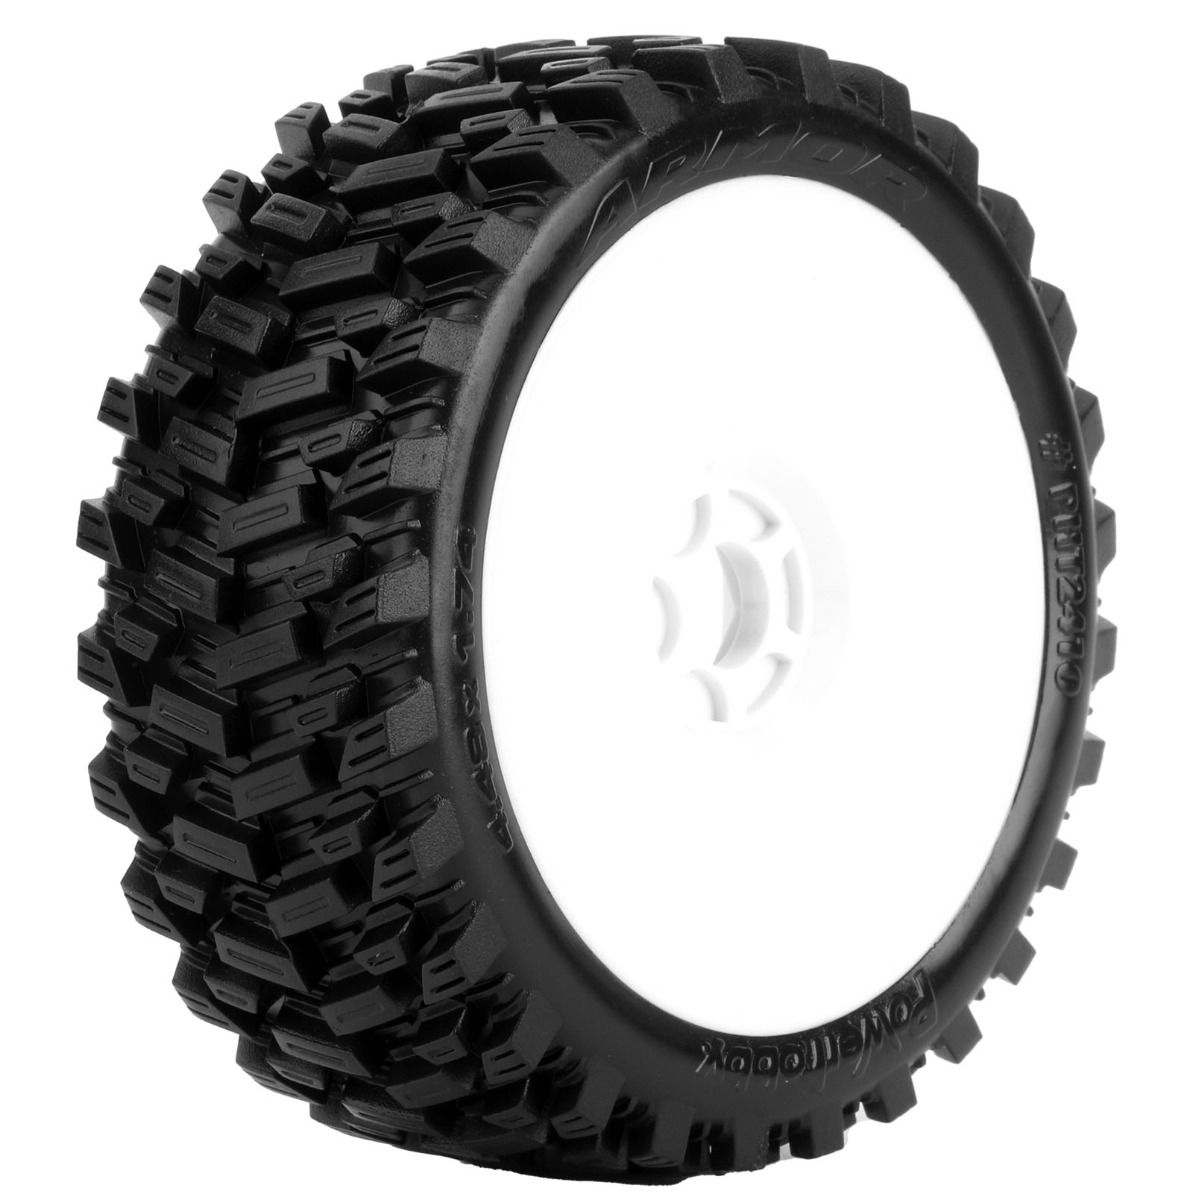 Powerhobby PHT2410WB Armor 1/8 Buggy Belted All Terrain Mounted Tires 17MM